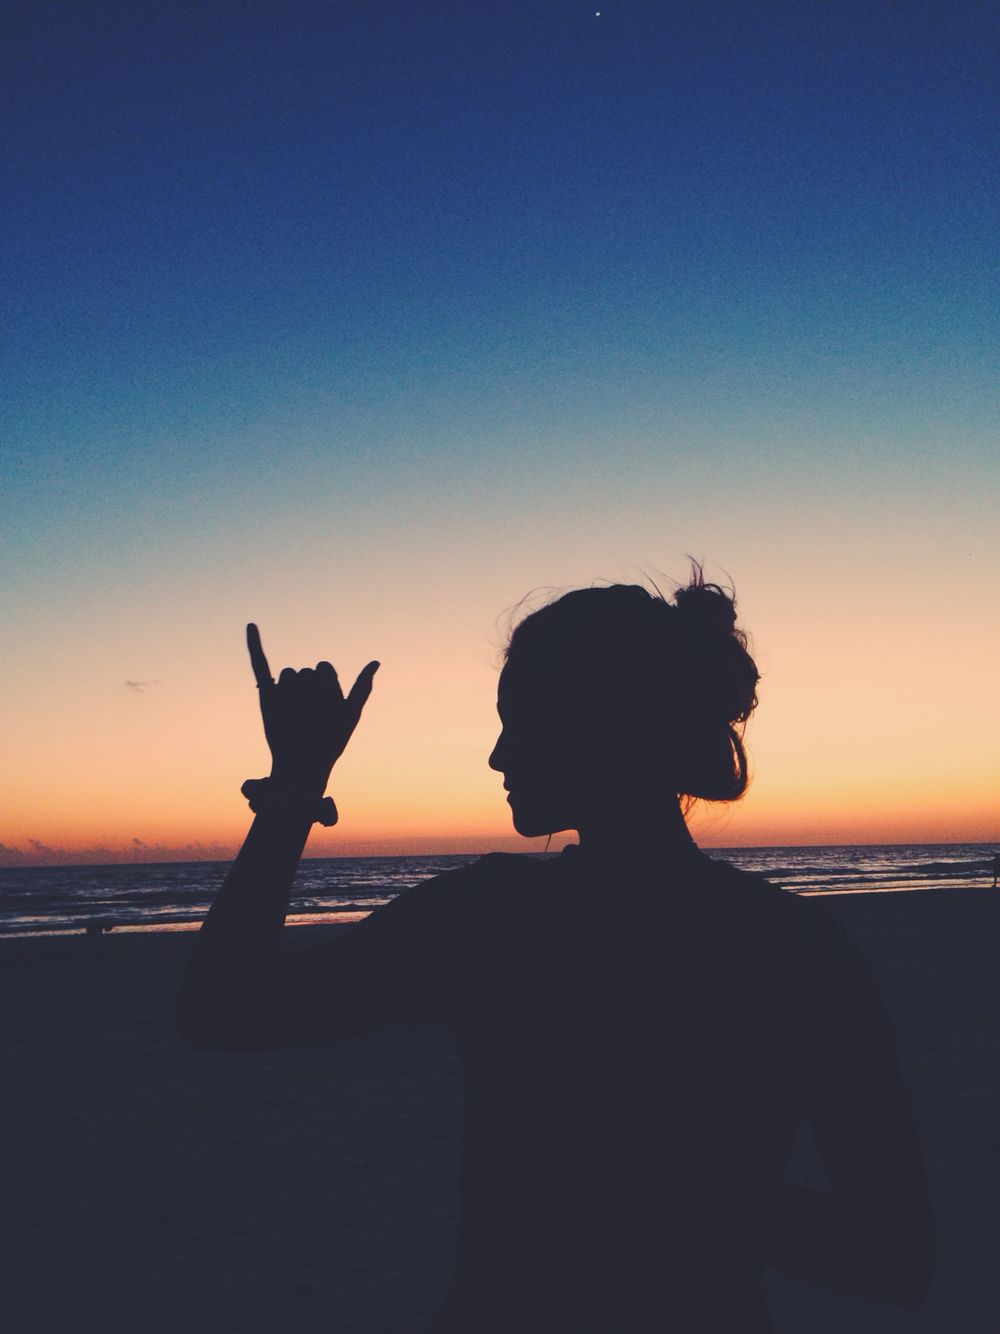 Hang Loose Photography Profile Pictures Instagram Silhouette